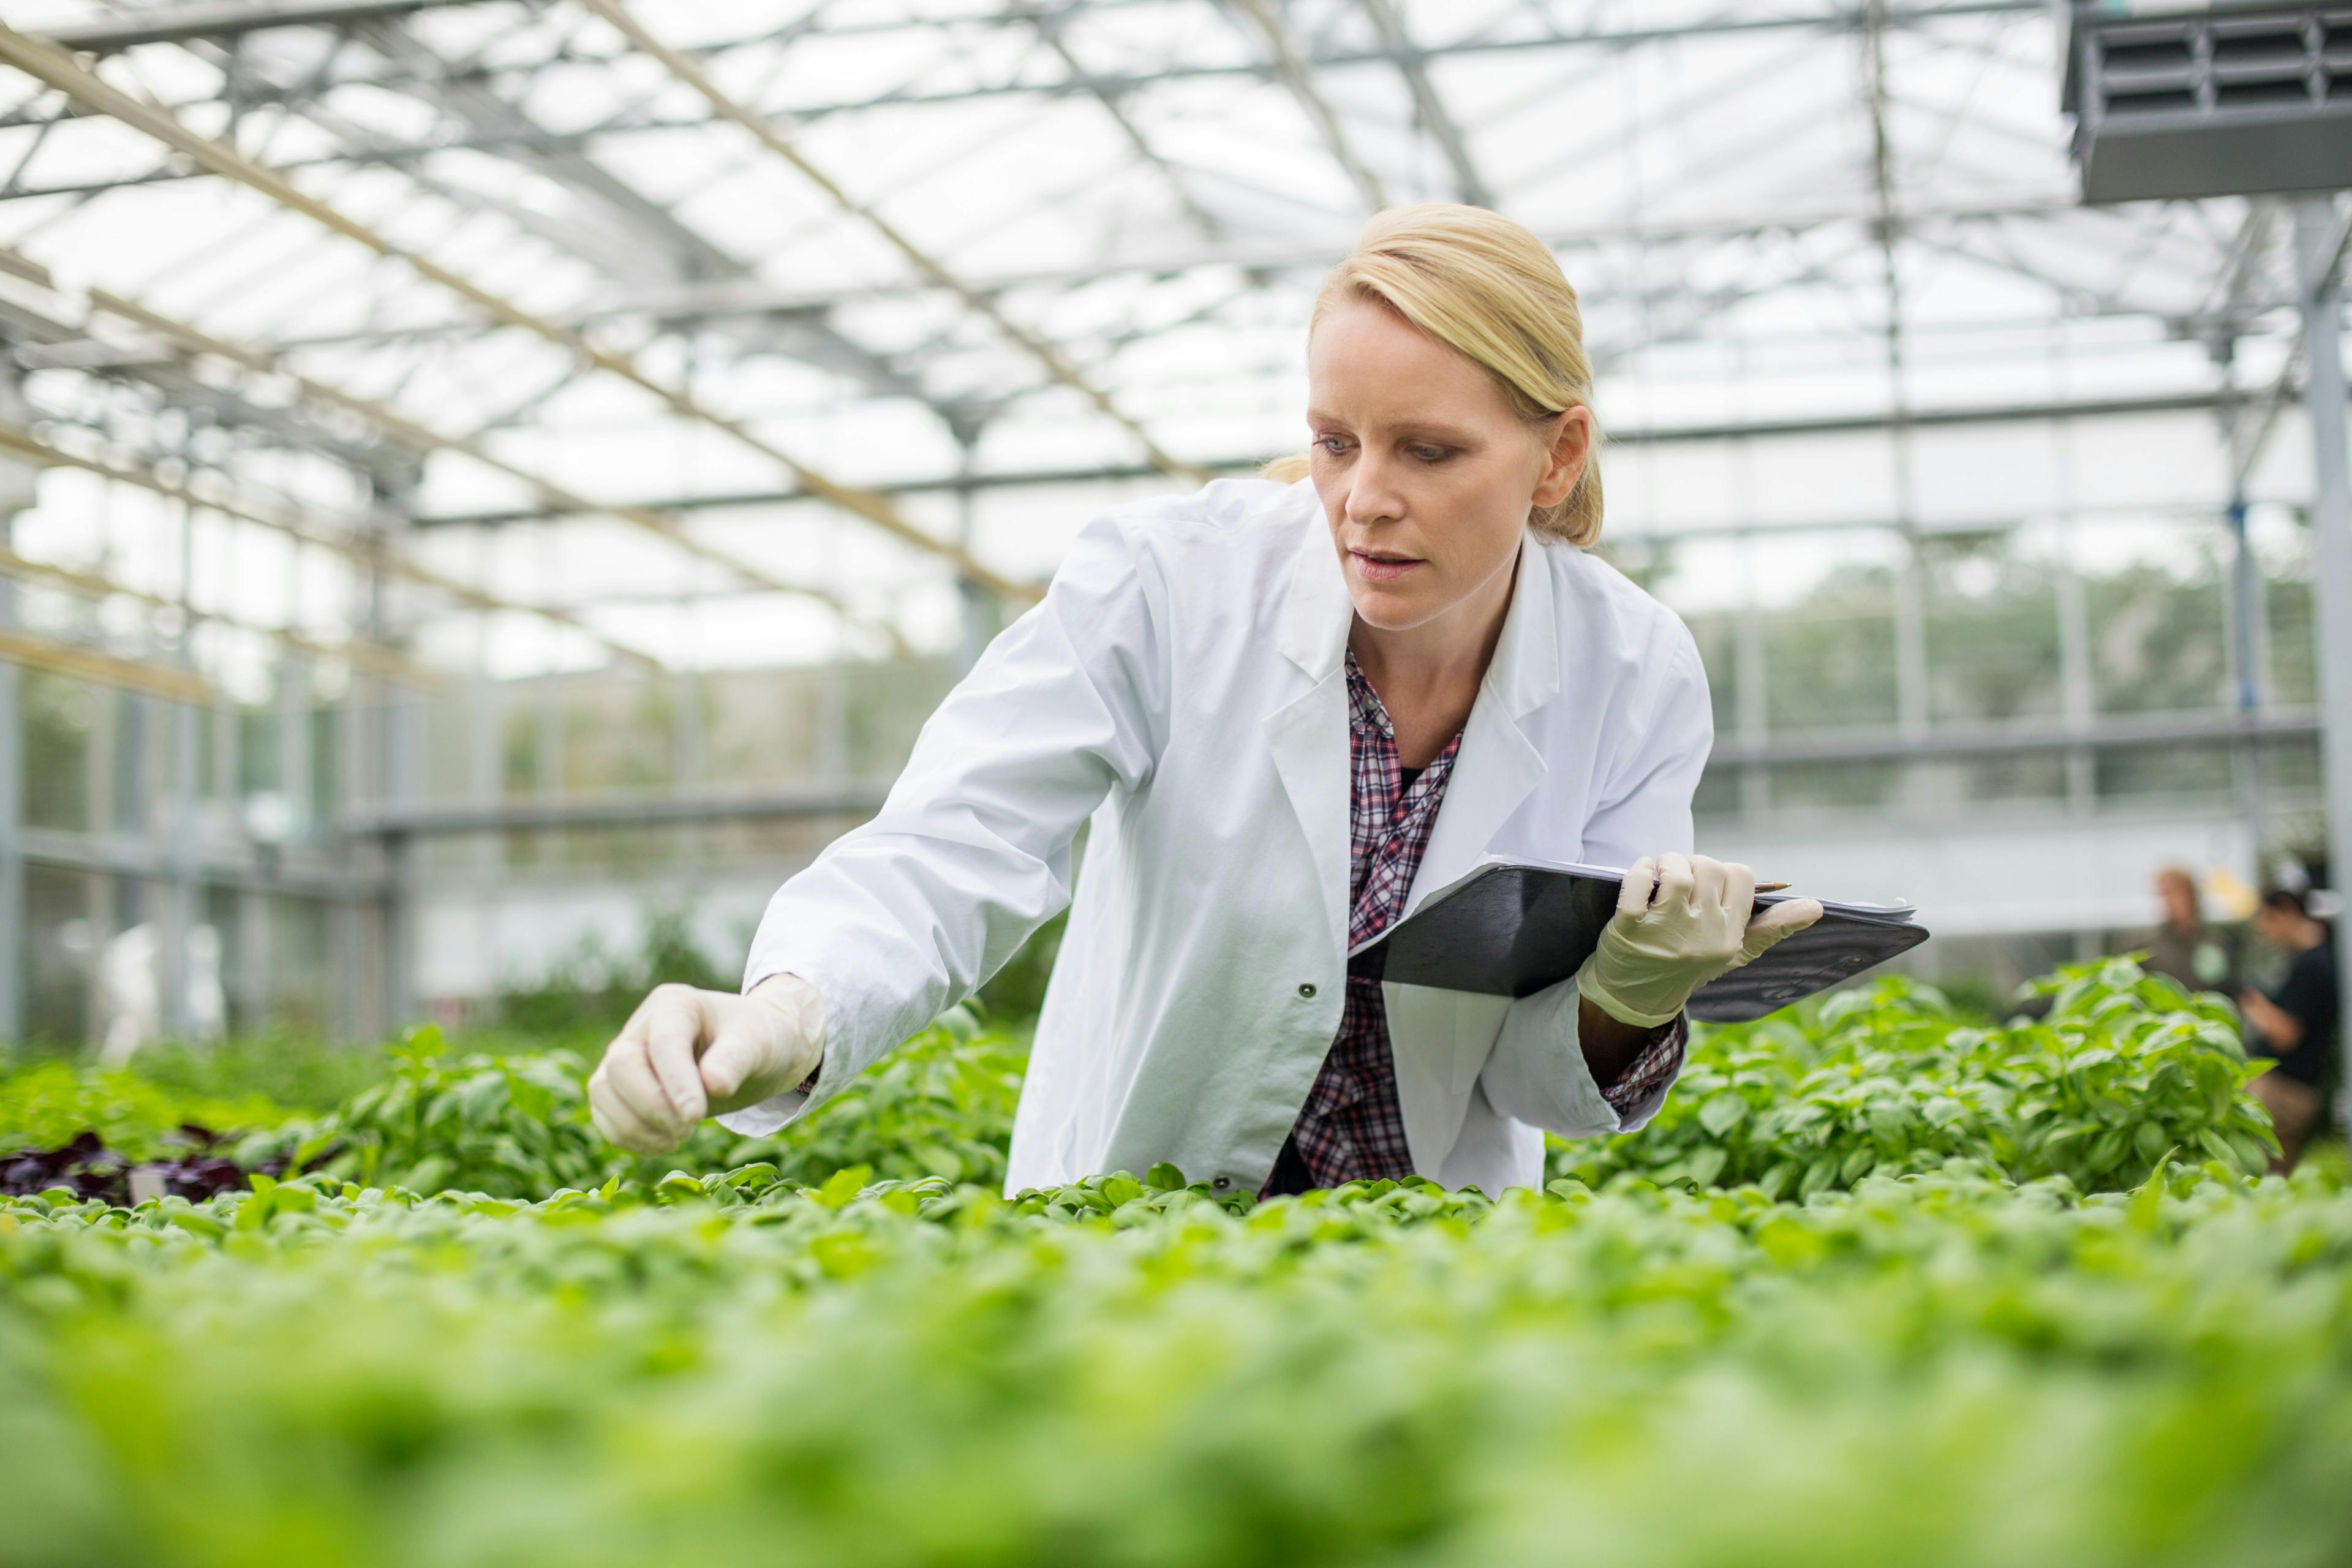 Female scientist inspecting plants growing in greenhouse